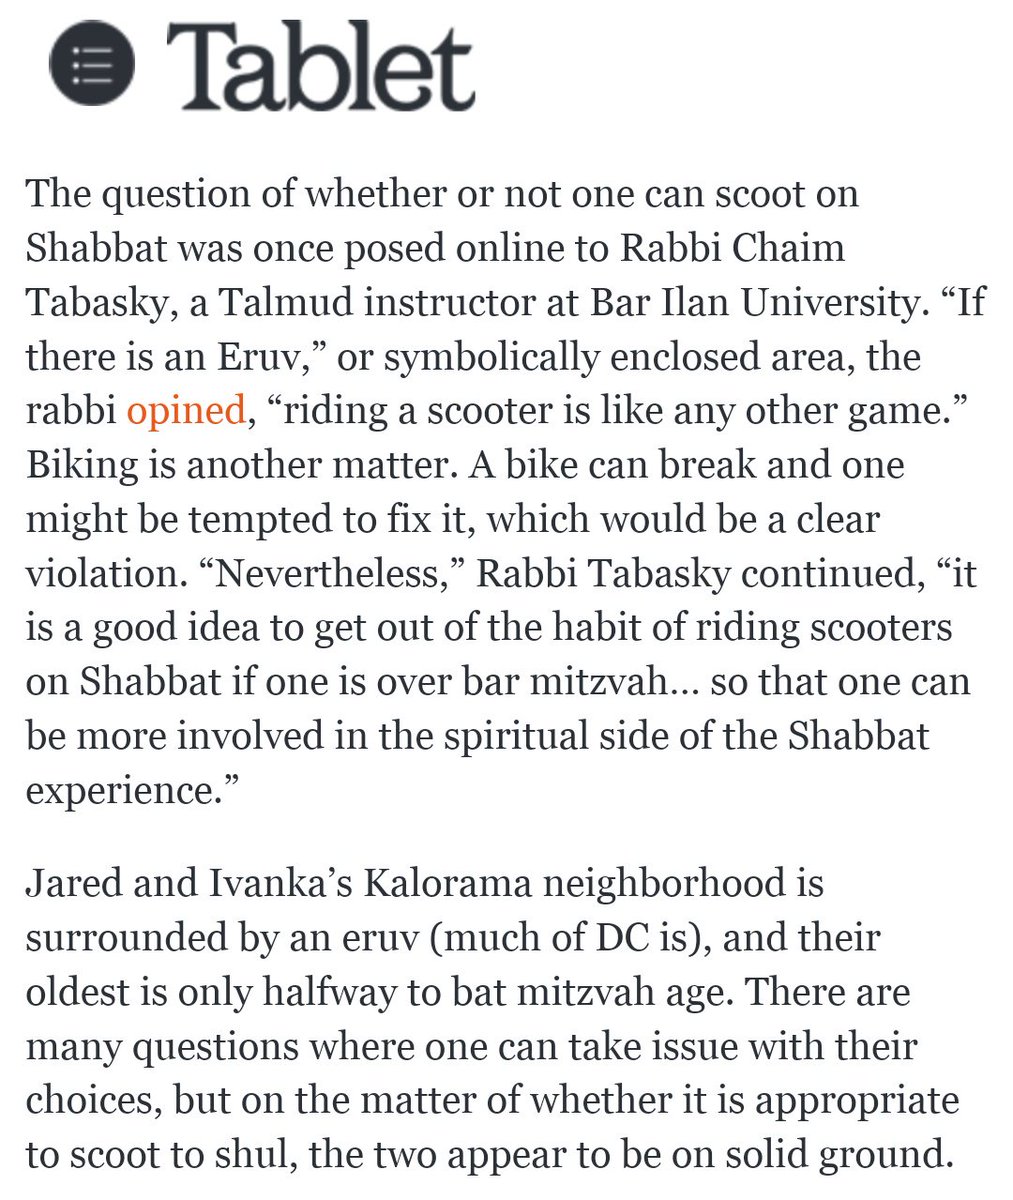 Here we have Tablet Magazine exploring the pressing issue of Jared and Ivanka's complicity with their adorable children on adorable scooters on shabbos, allowing us to learn that it's quite kosher.